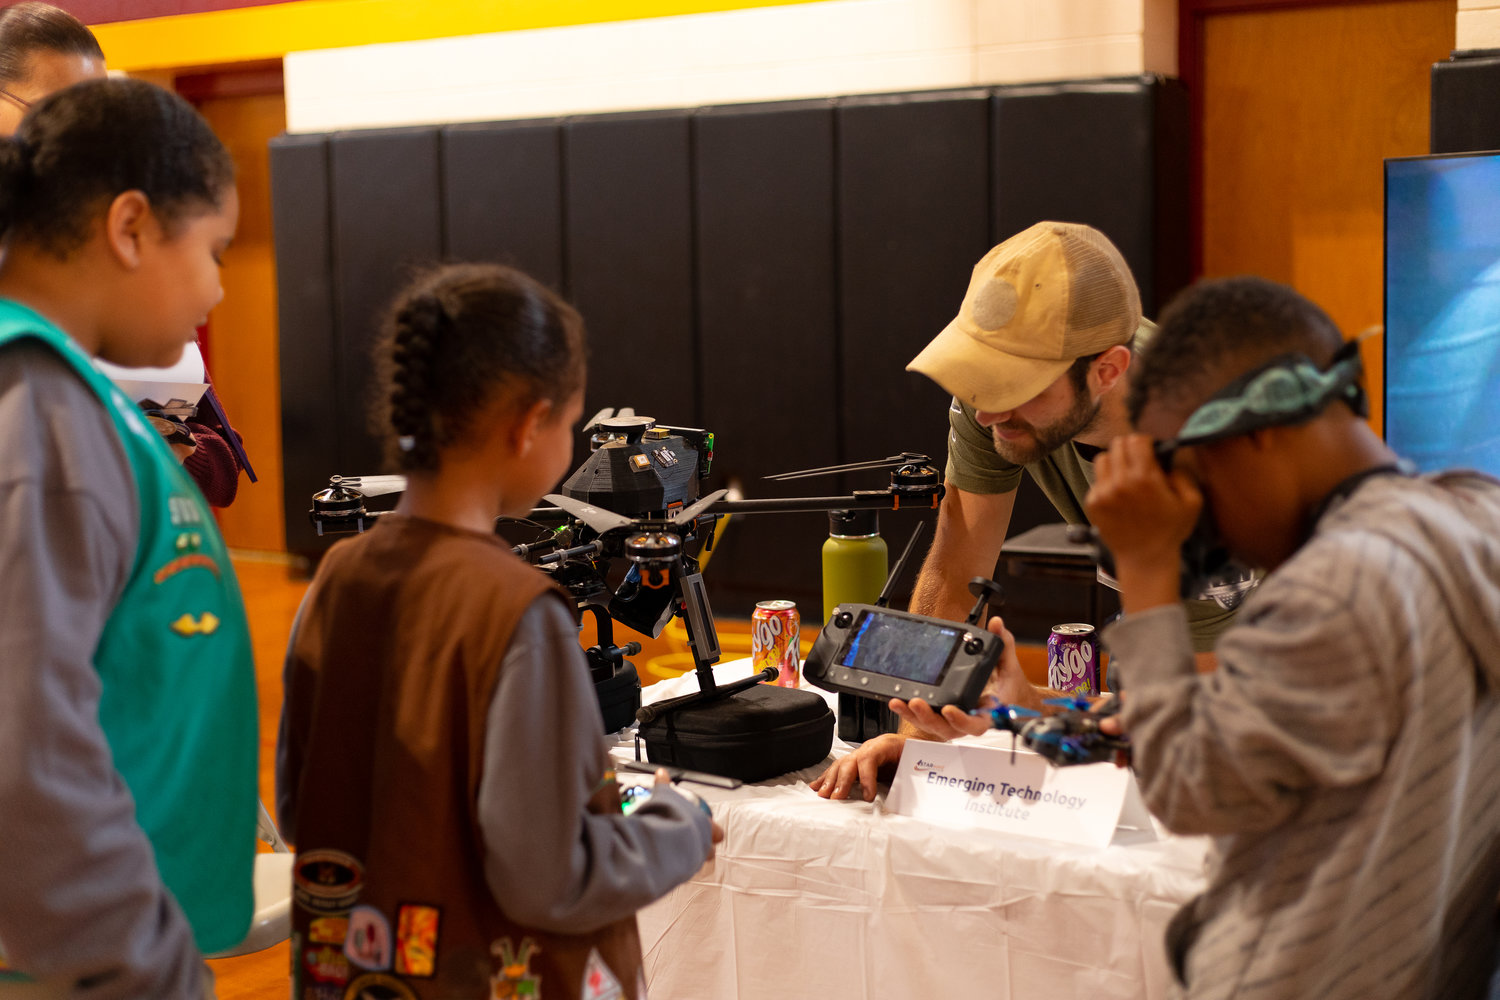 Attendees visit the exhibit booths at the STARward STEM Expo on Tuesday at Douglas Byrd High School.